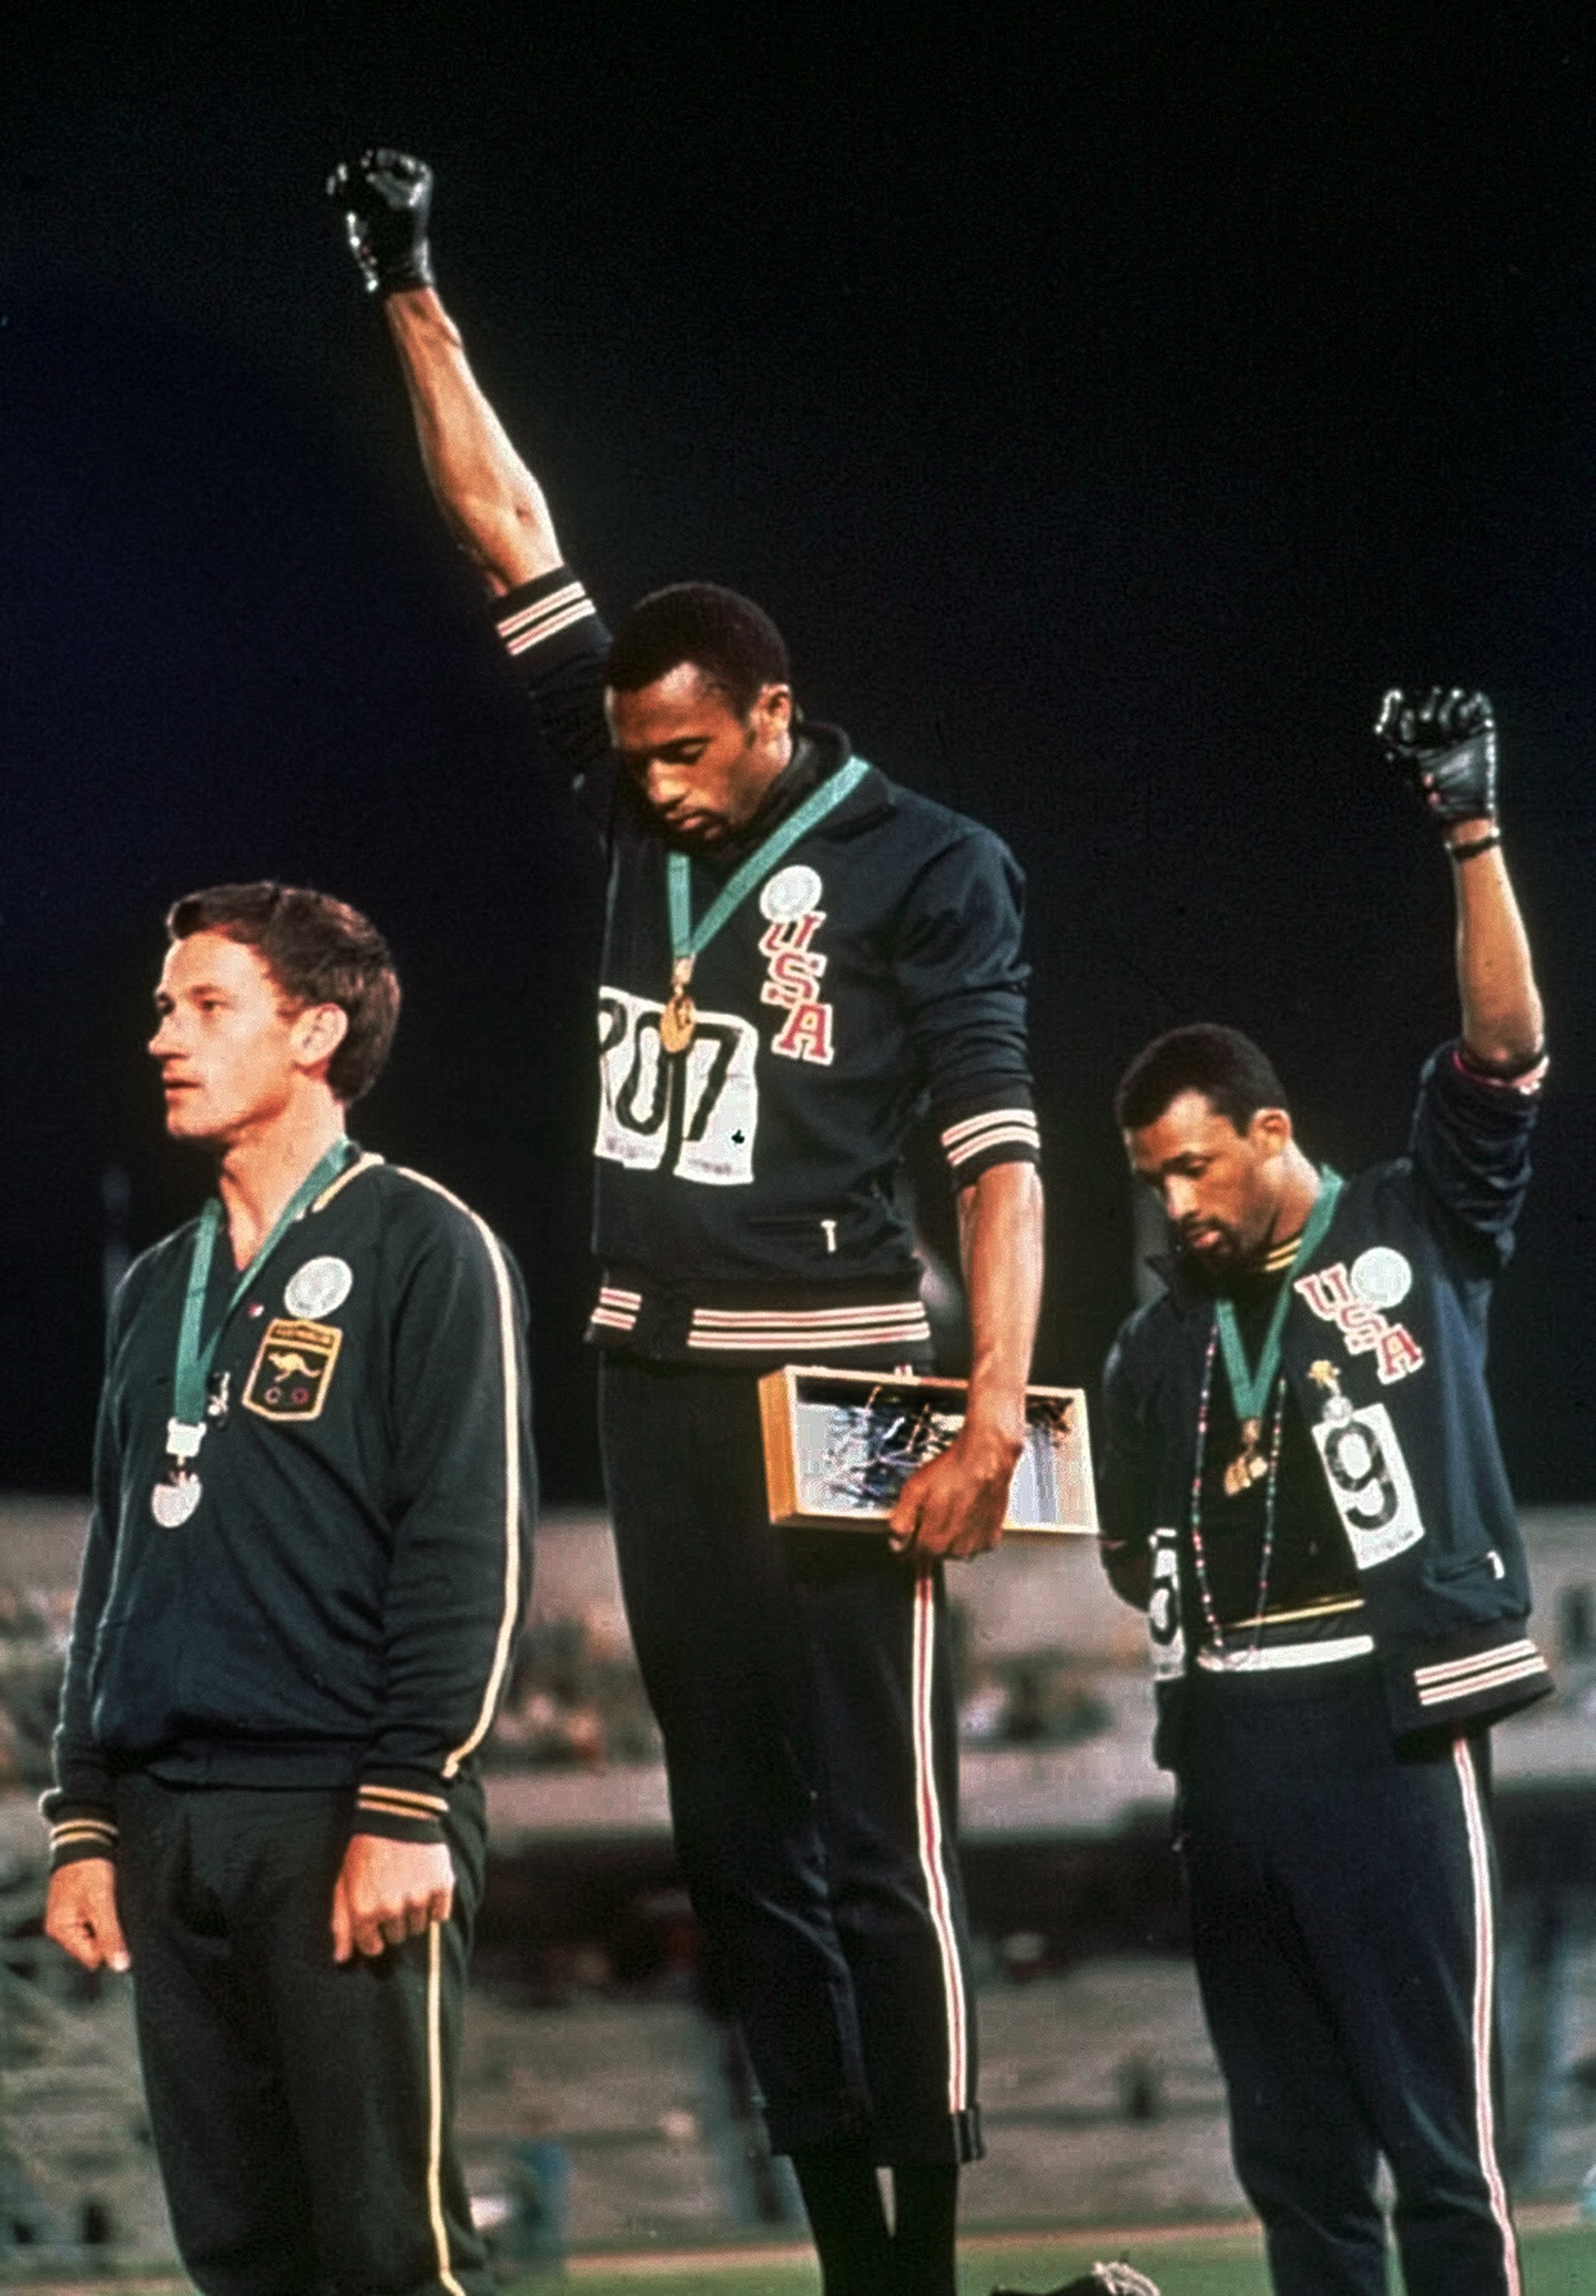  Extending gloved hands skyward in racial protest, U.S. athletes Tommie Smith, center, and John Carlos stare downward during the playing of the Star Spangled Banner after Smith received the gold and Carlos the bronze for the 200 meter run at the Summer Olympic Games in Mexico City on Oct. 16, 1968. AP Photo/FILE.